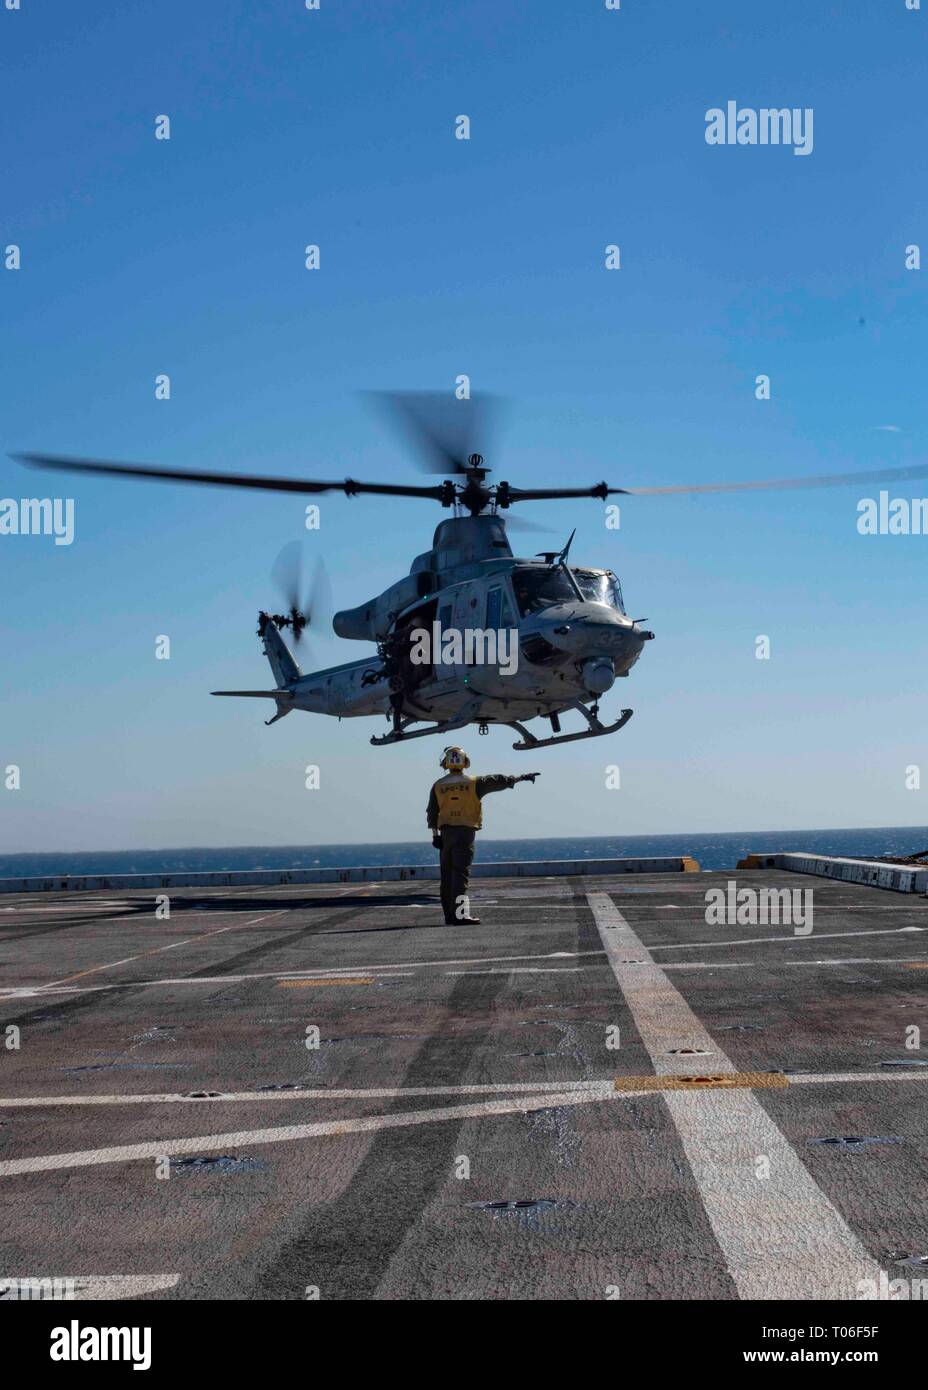 190315-N-HG389-0025 MEDITERRANEAN SEA (Mar. 15, 2019) A UH-1Y Huey helicopter assigned to the “Black Knights” of Marine Medium Tiltrotor Squadron (VMM) 264 (Reinforced) departs the flight deck of the San Antonio-class amphibious transport dock ship USS Arlington (LPD 24), Mar. 15, 2019. Arlington is on a scheduled deployment as part of the Kearsarge Amphibious Ready Group in support of maritime security operations, crisis response and theater security cooperation, while also providing a forward naval presence. (U.S. Navy photo by Mass Communication Specialist 2nd Class Brandon Parker/Released) Stock Photo